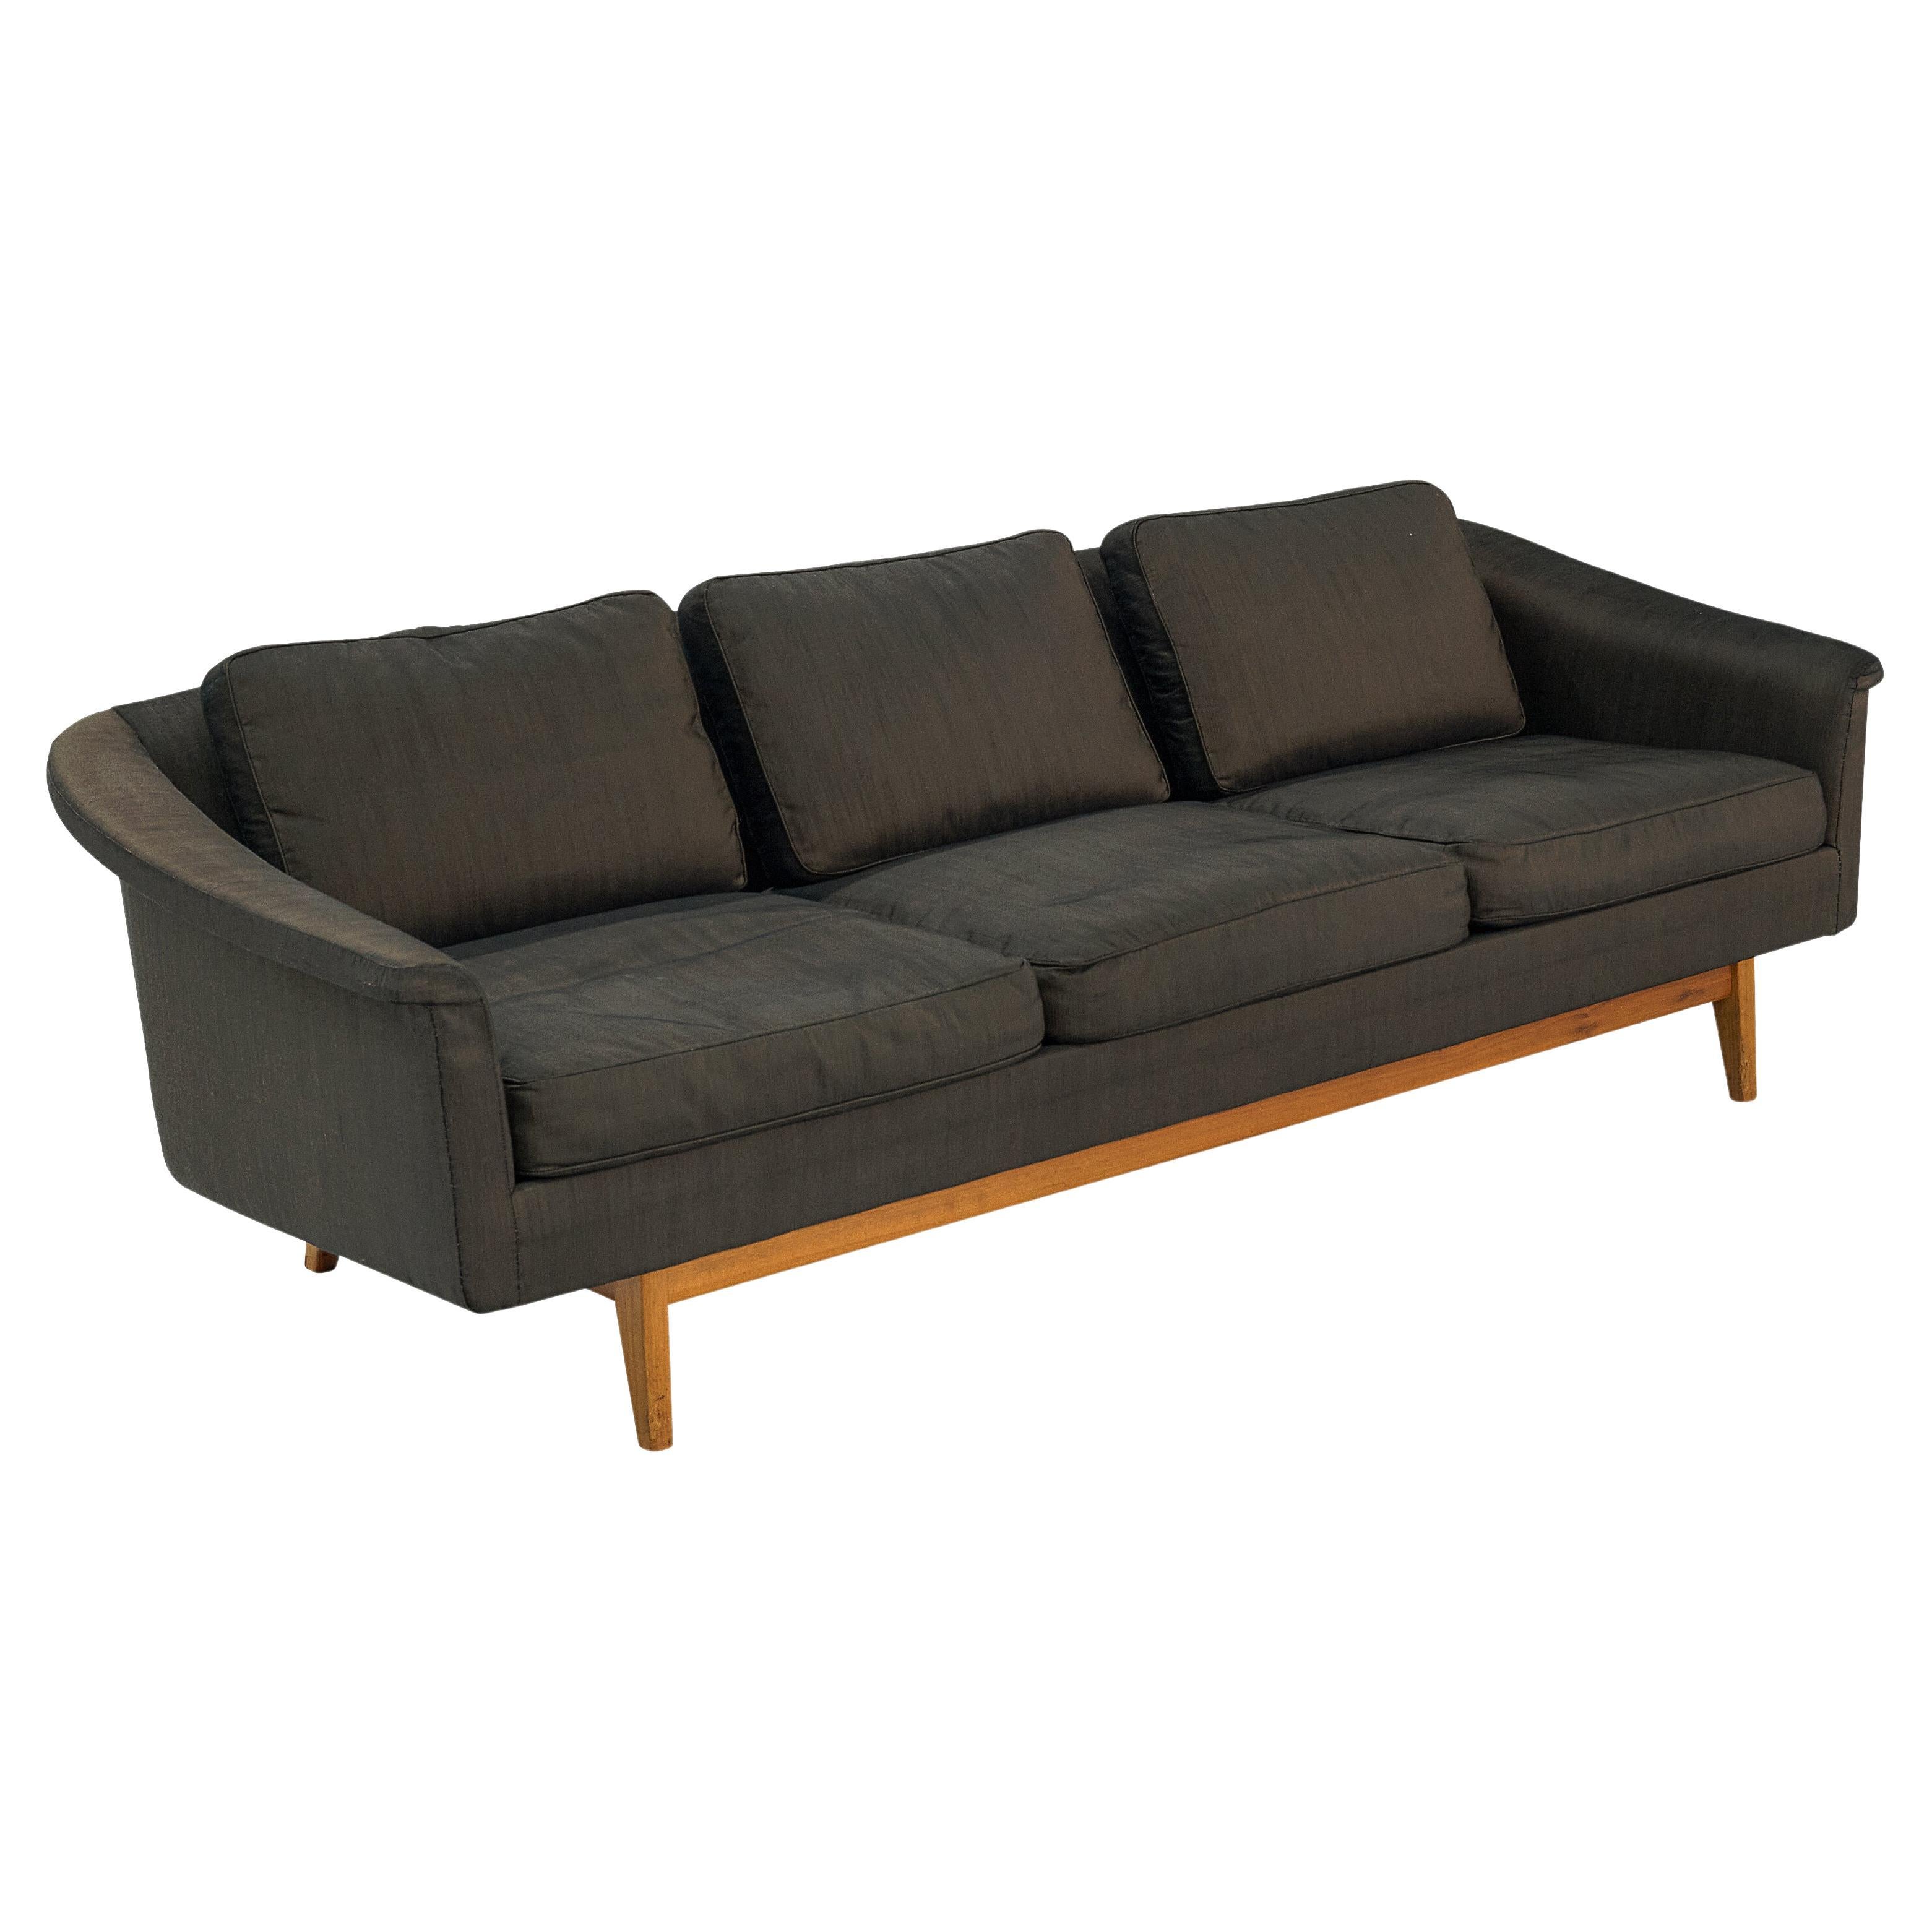 Folke Ohlsson for Dux ‘Passadena’ Sofa in Grey Upholstery and Walnut  For Sale